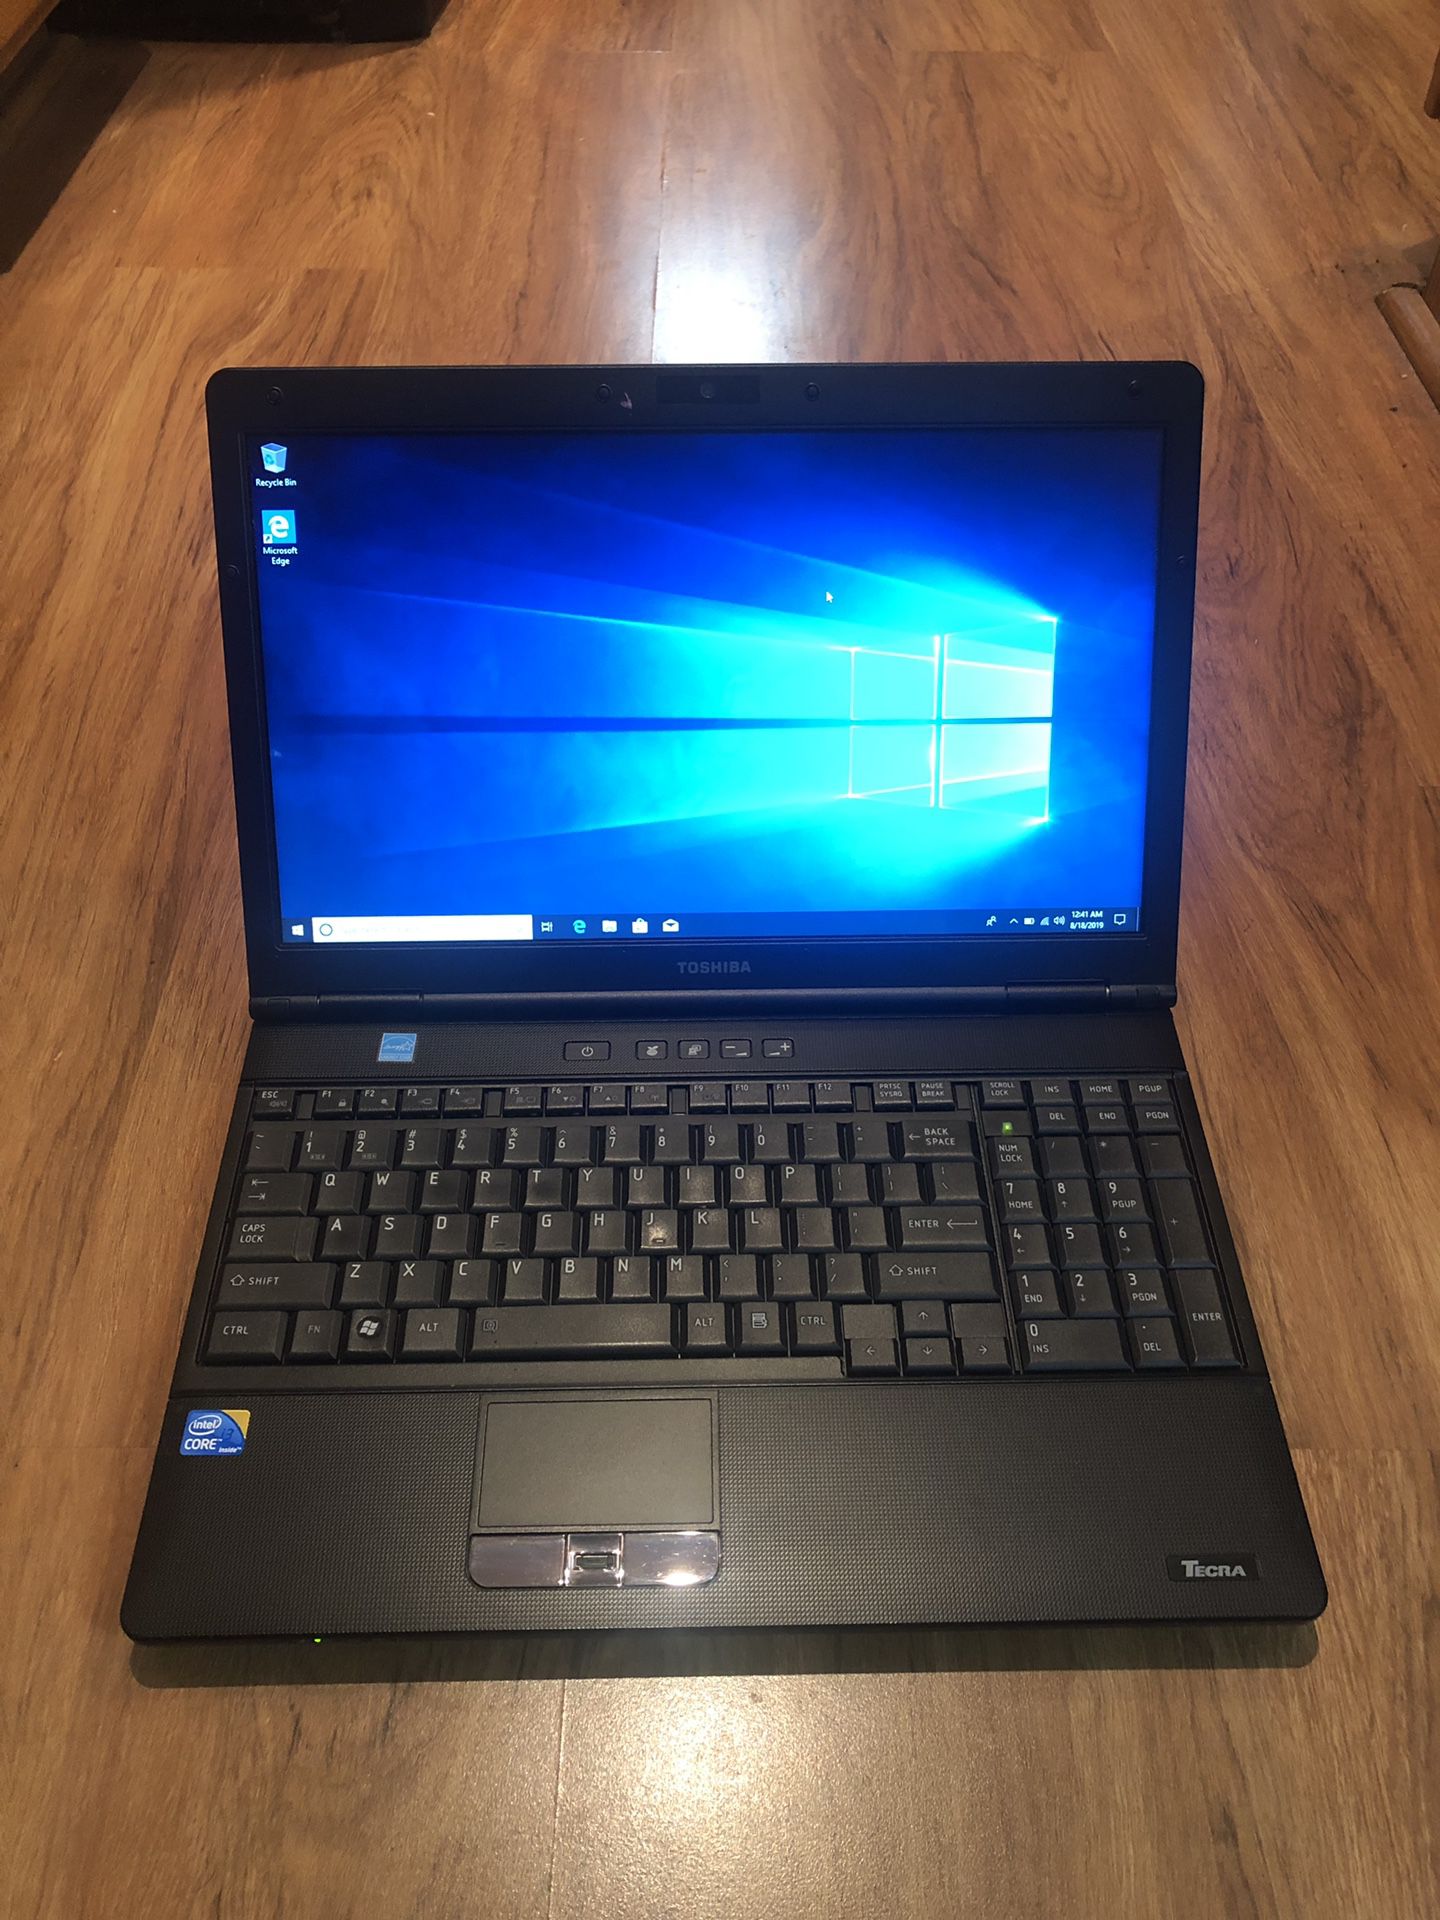 Toshiba TECRA A11 core i3 4GB Ram 160GB Hard Drive 15.6 inch Windows 10 Pro Laptop with charger in Excellent Working condition!!!!!!!!